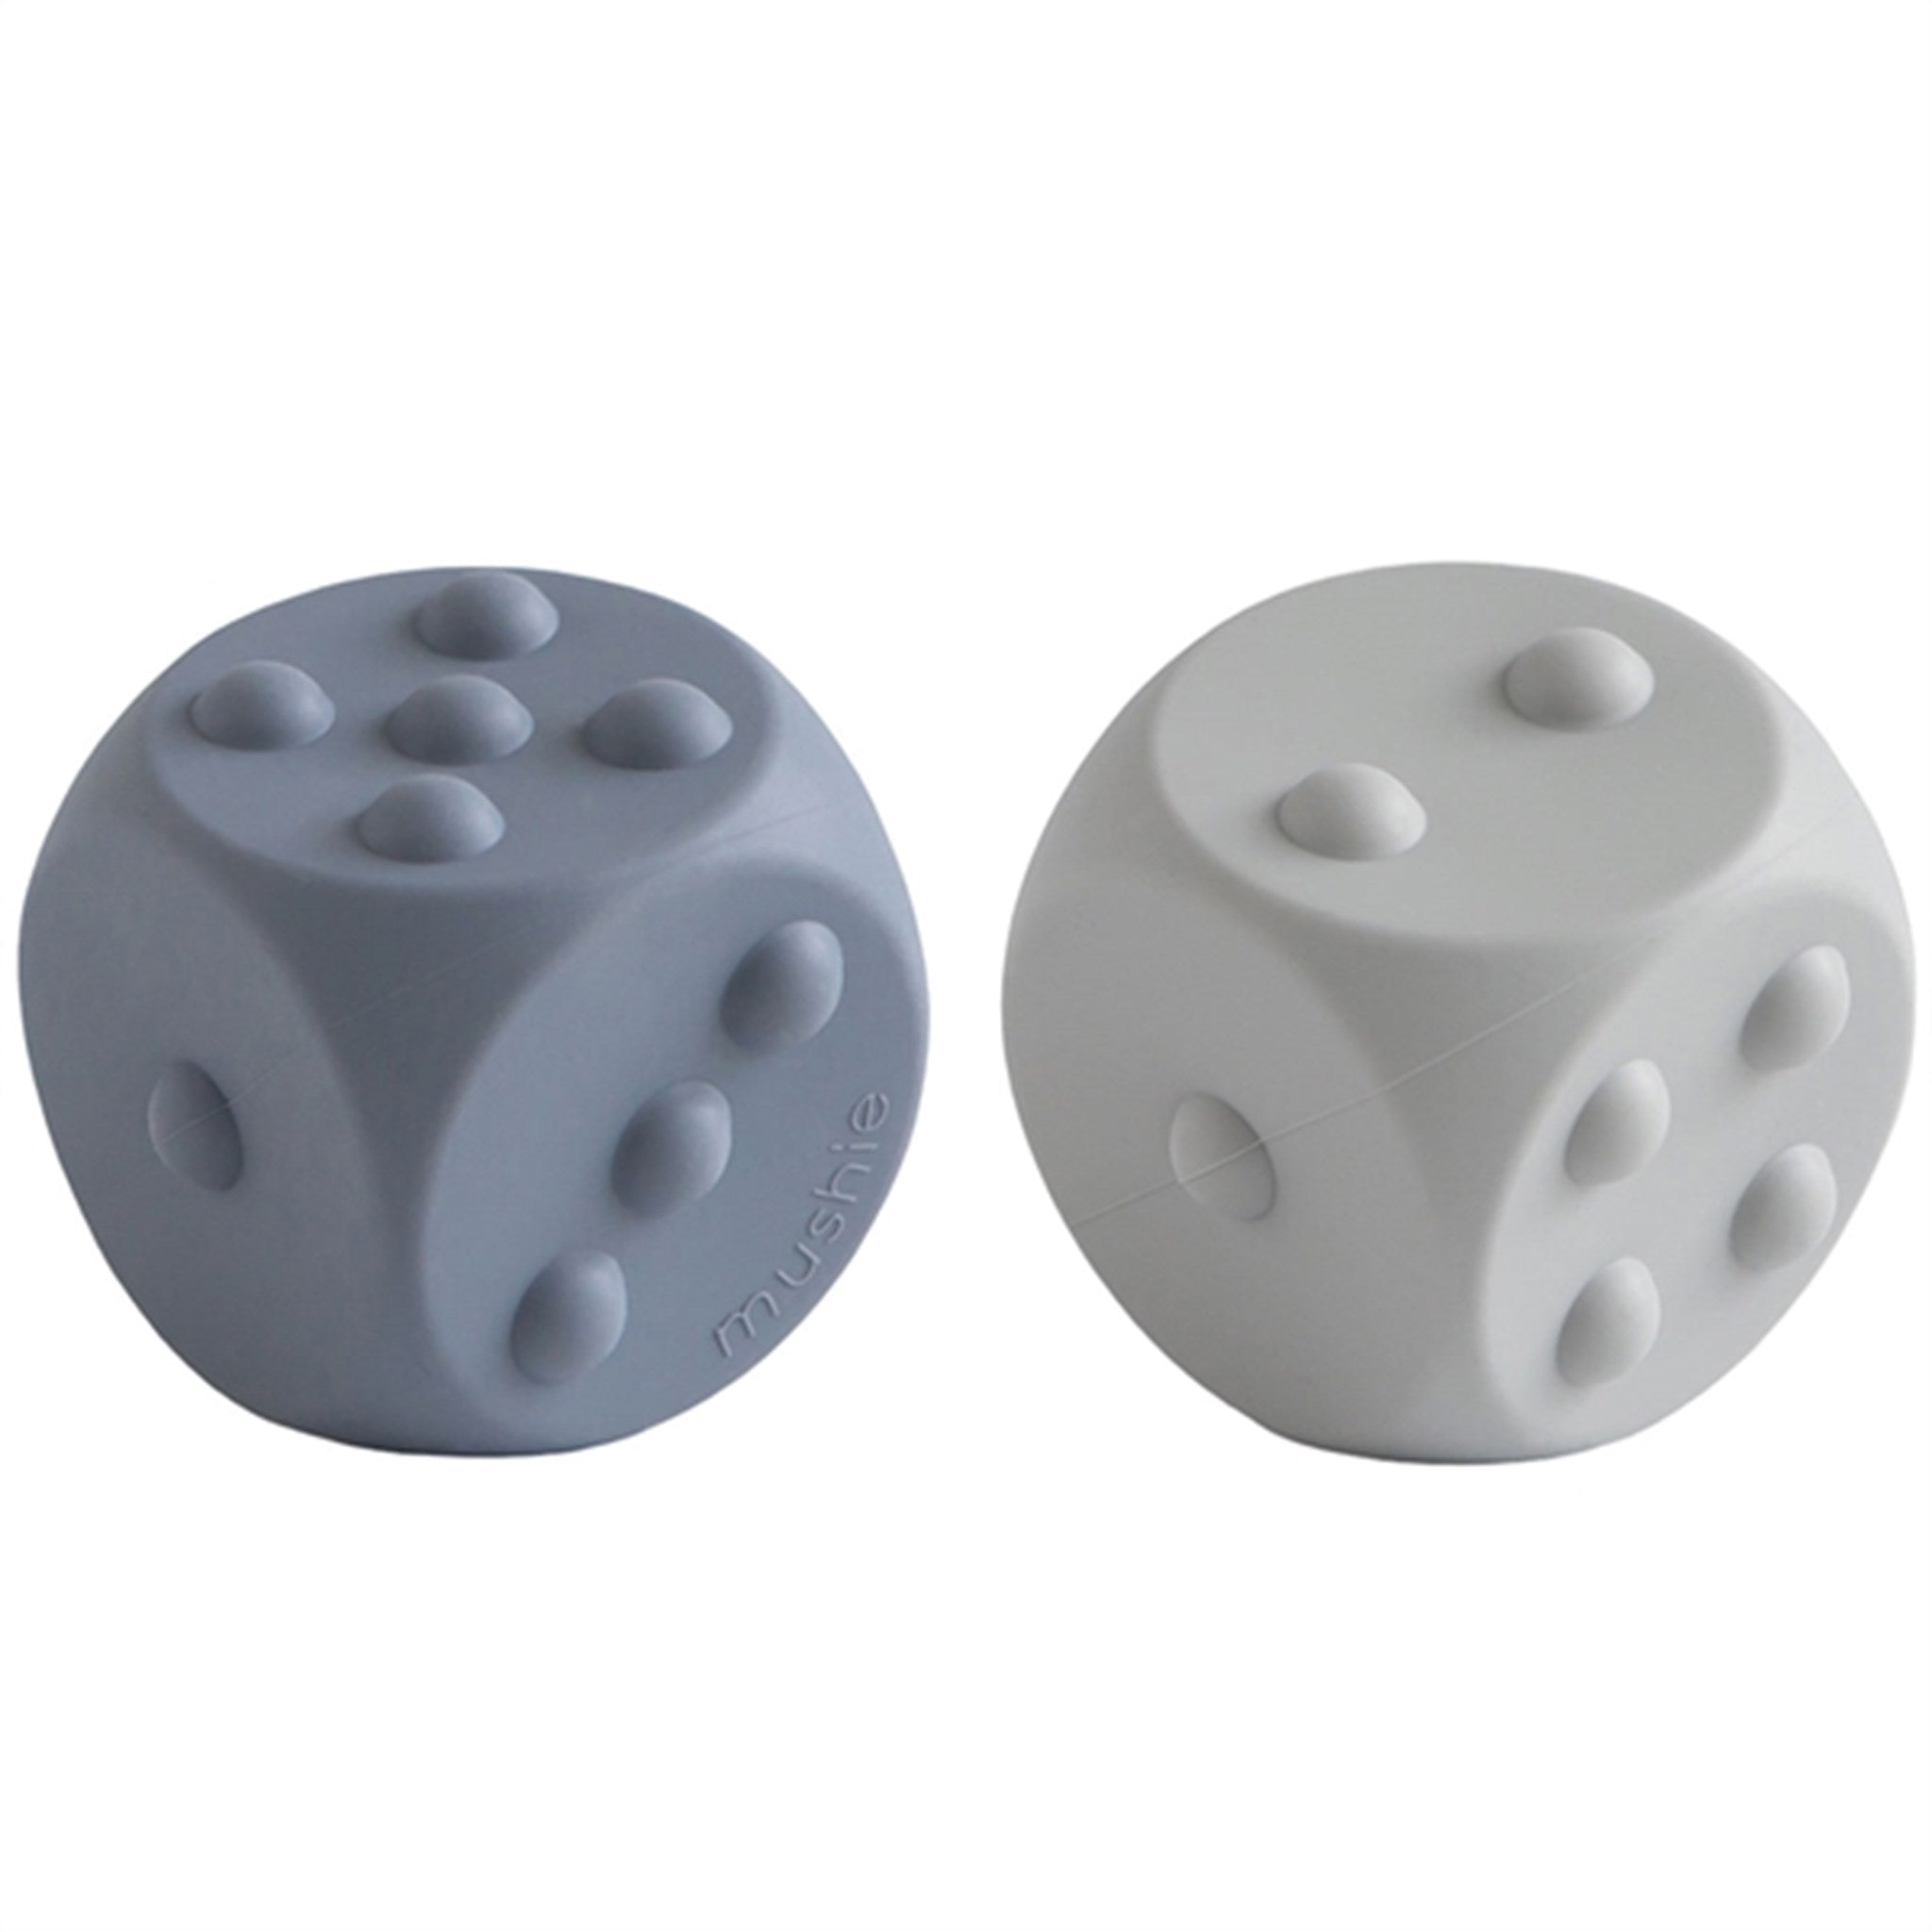 Mushie Silicone Dice Press Toy  2-pack Tradewinds/Stone